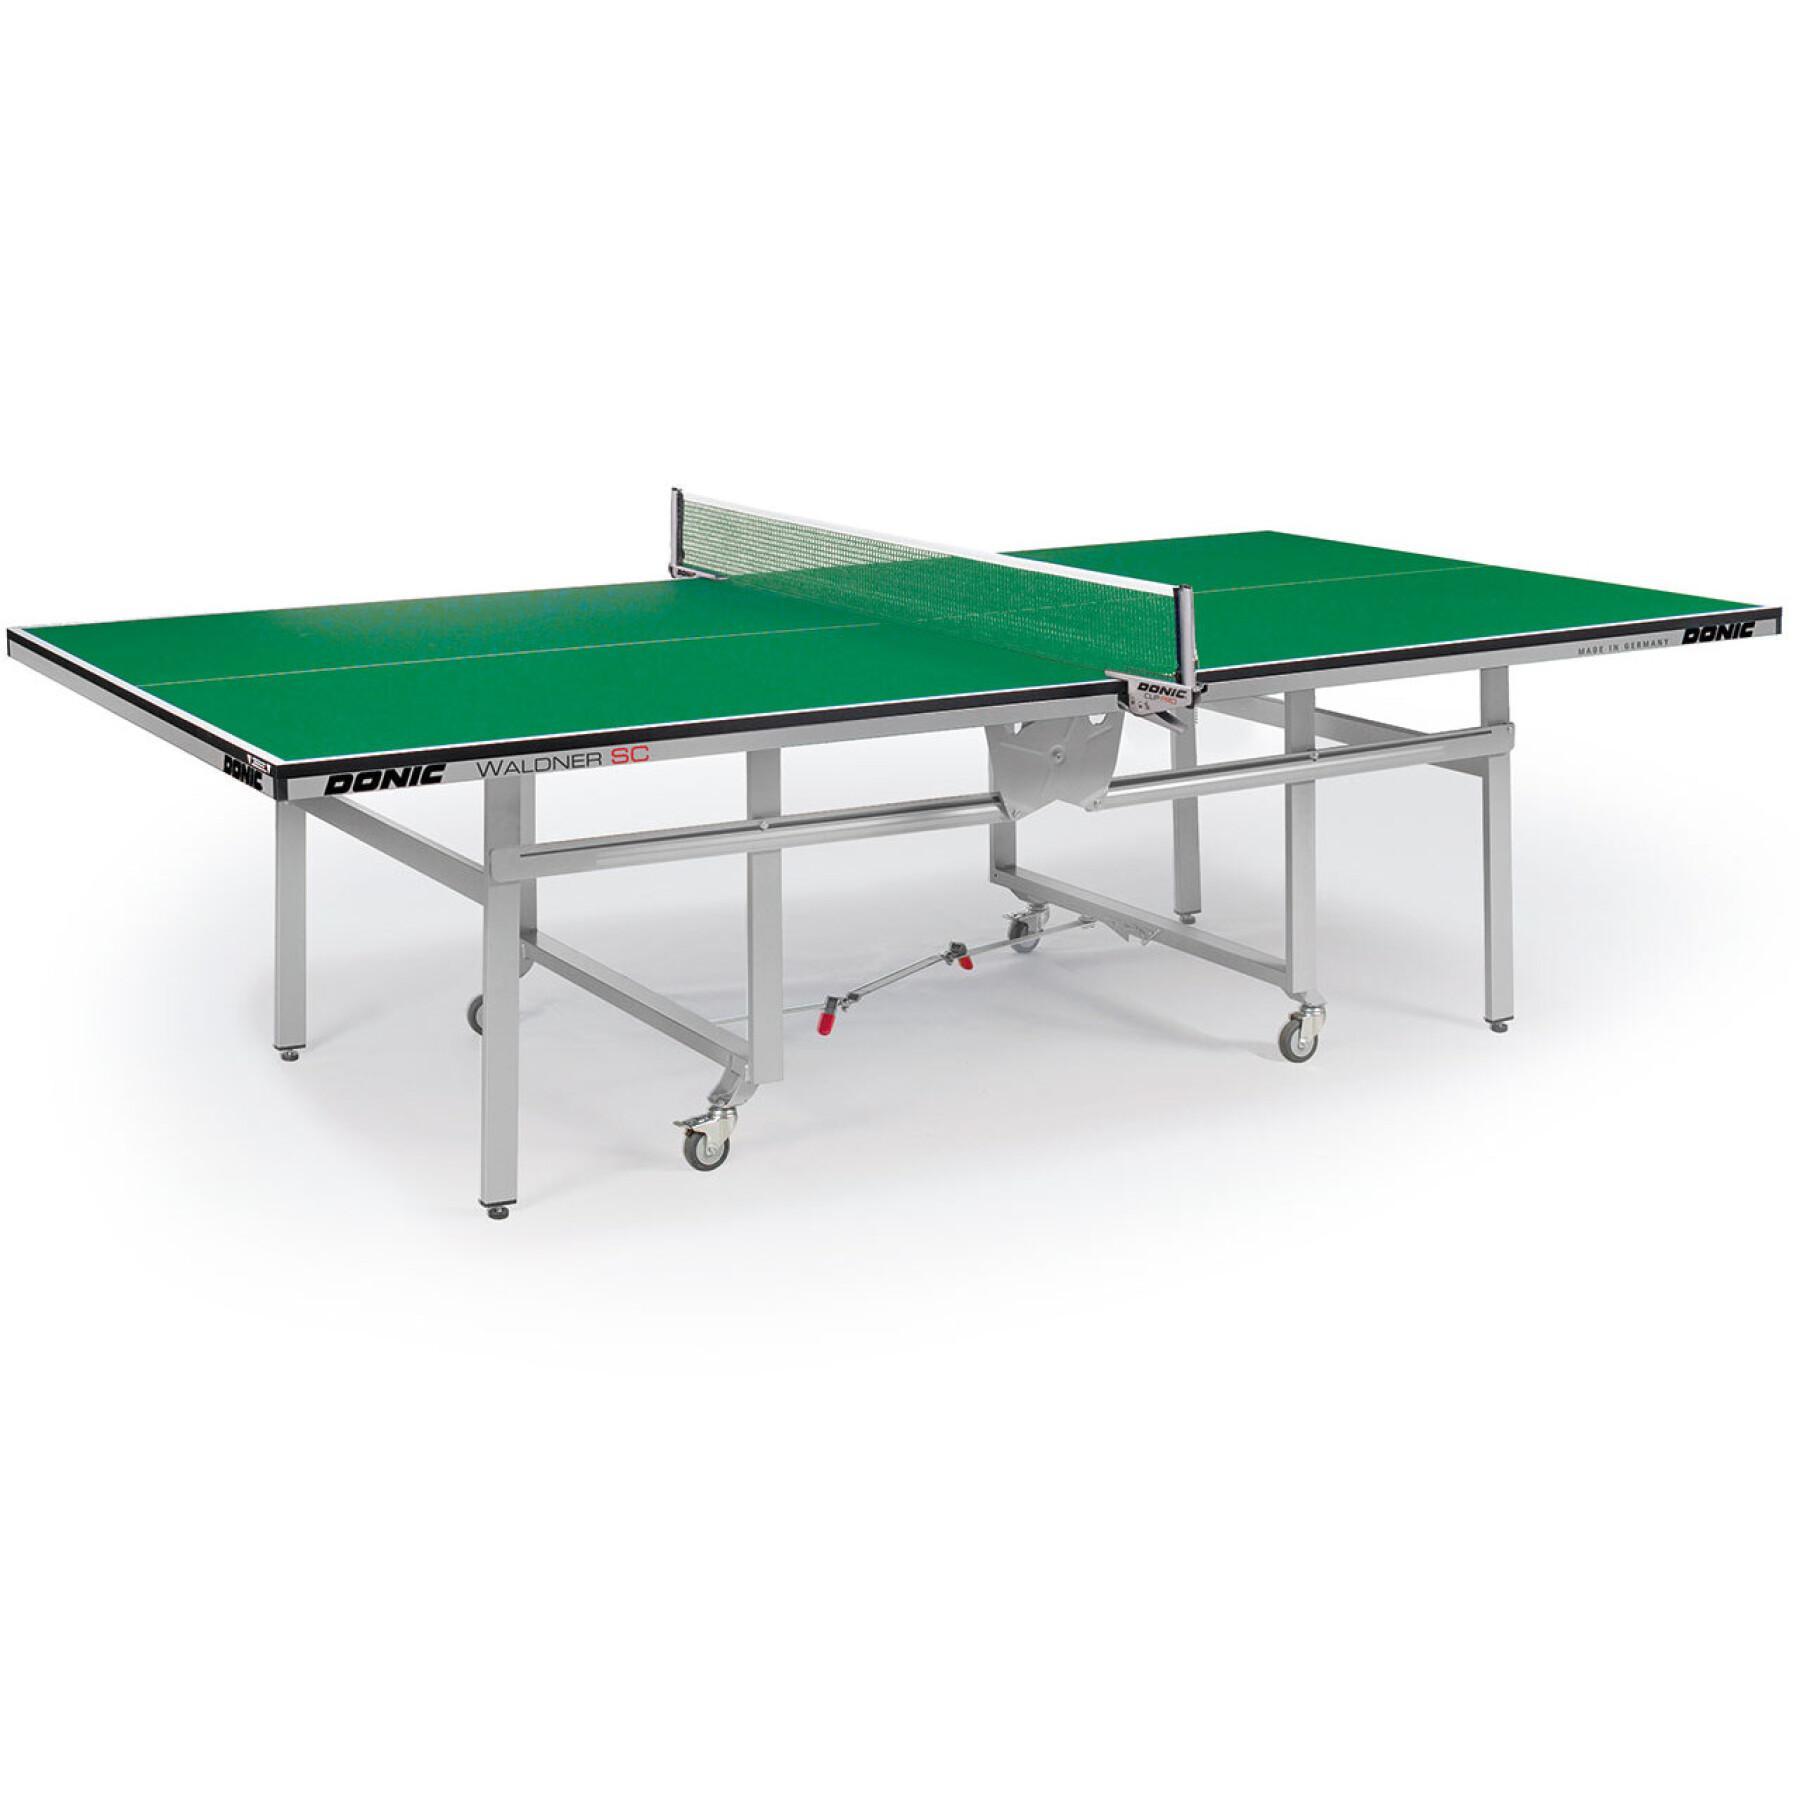 Table tennis table Donic Waldner SC